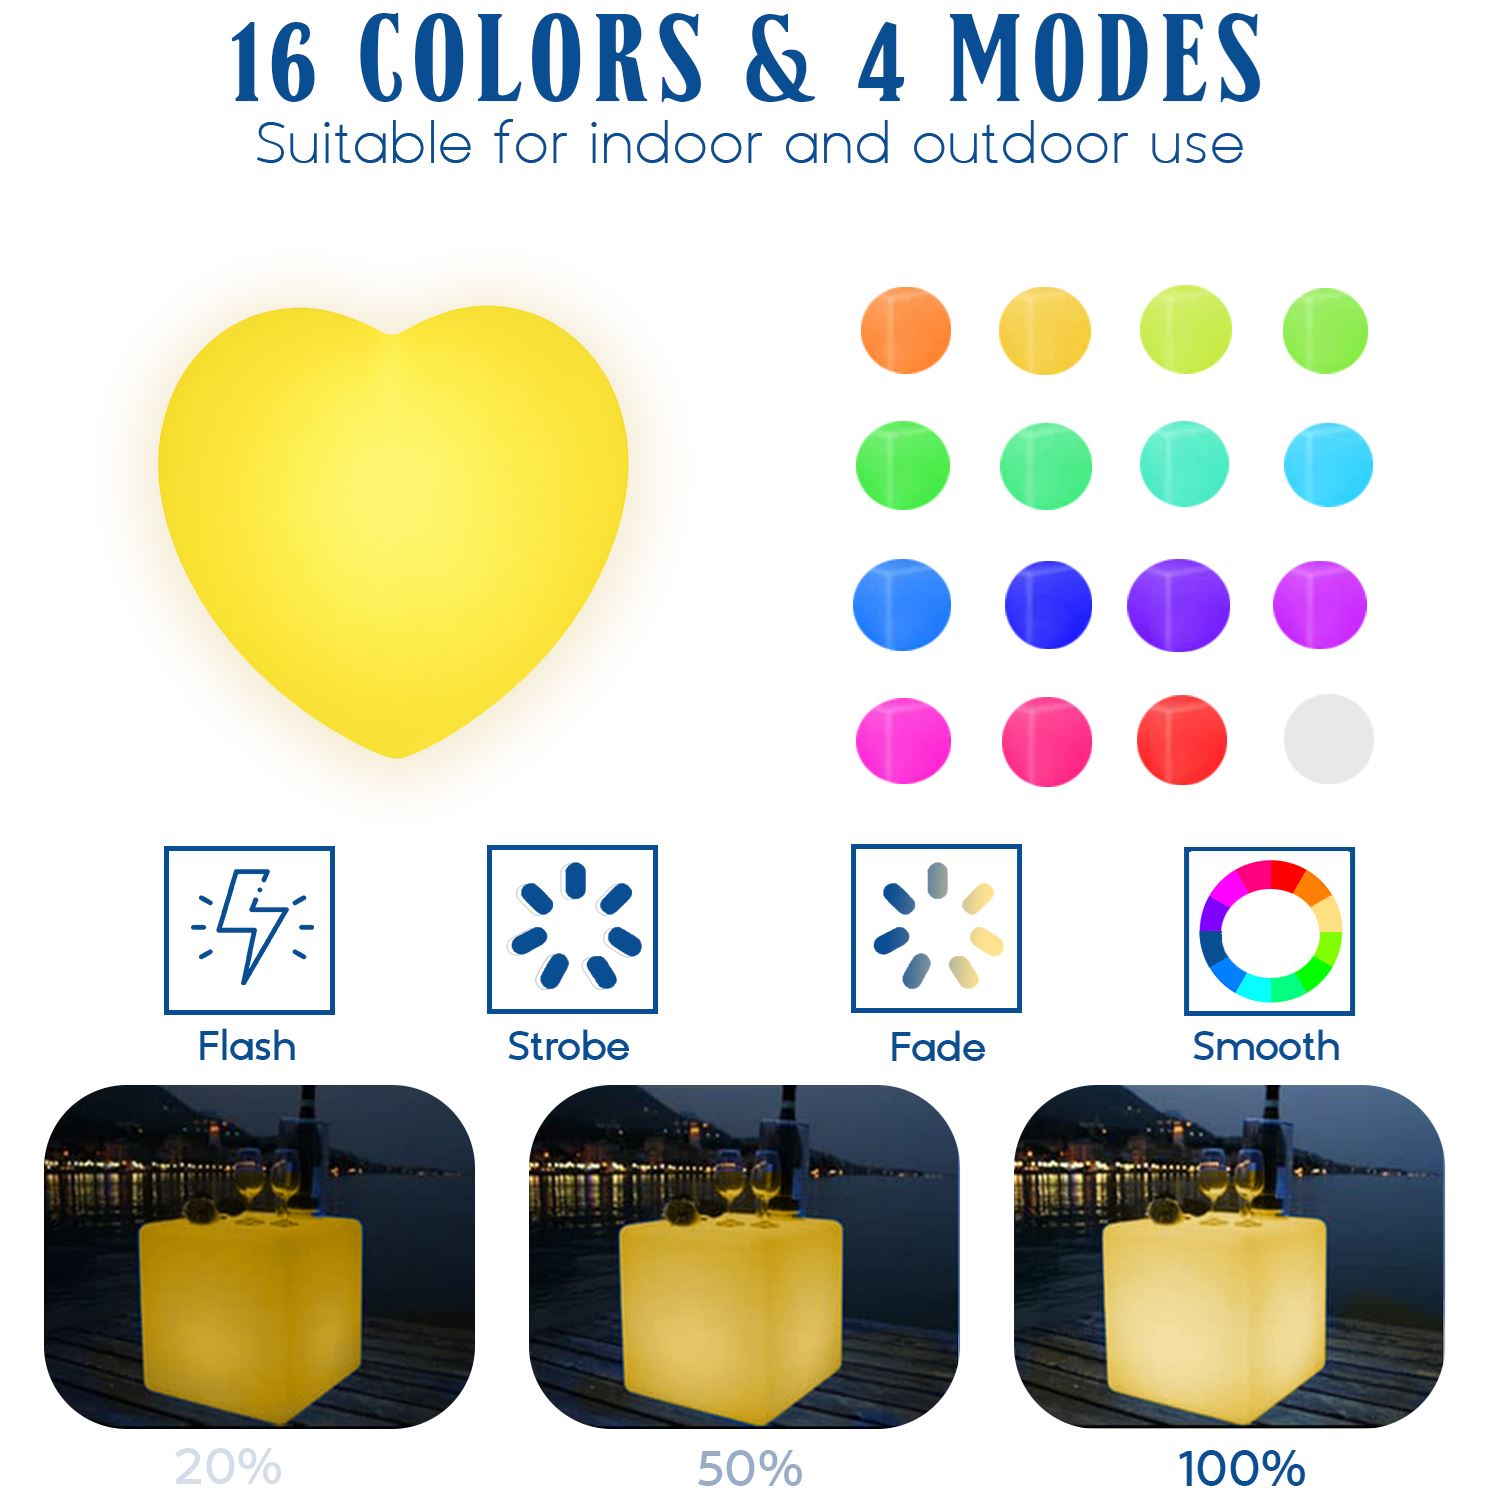 Novelty Lights 12" LED Plastic 3D Glow Heart Light, Waterproof Rechargeable Color Changing Party Heart with Remote, Great for Home Patio Restaurant Lighting - image 2 of 7